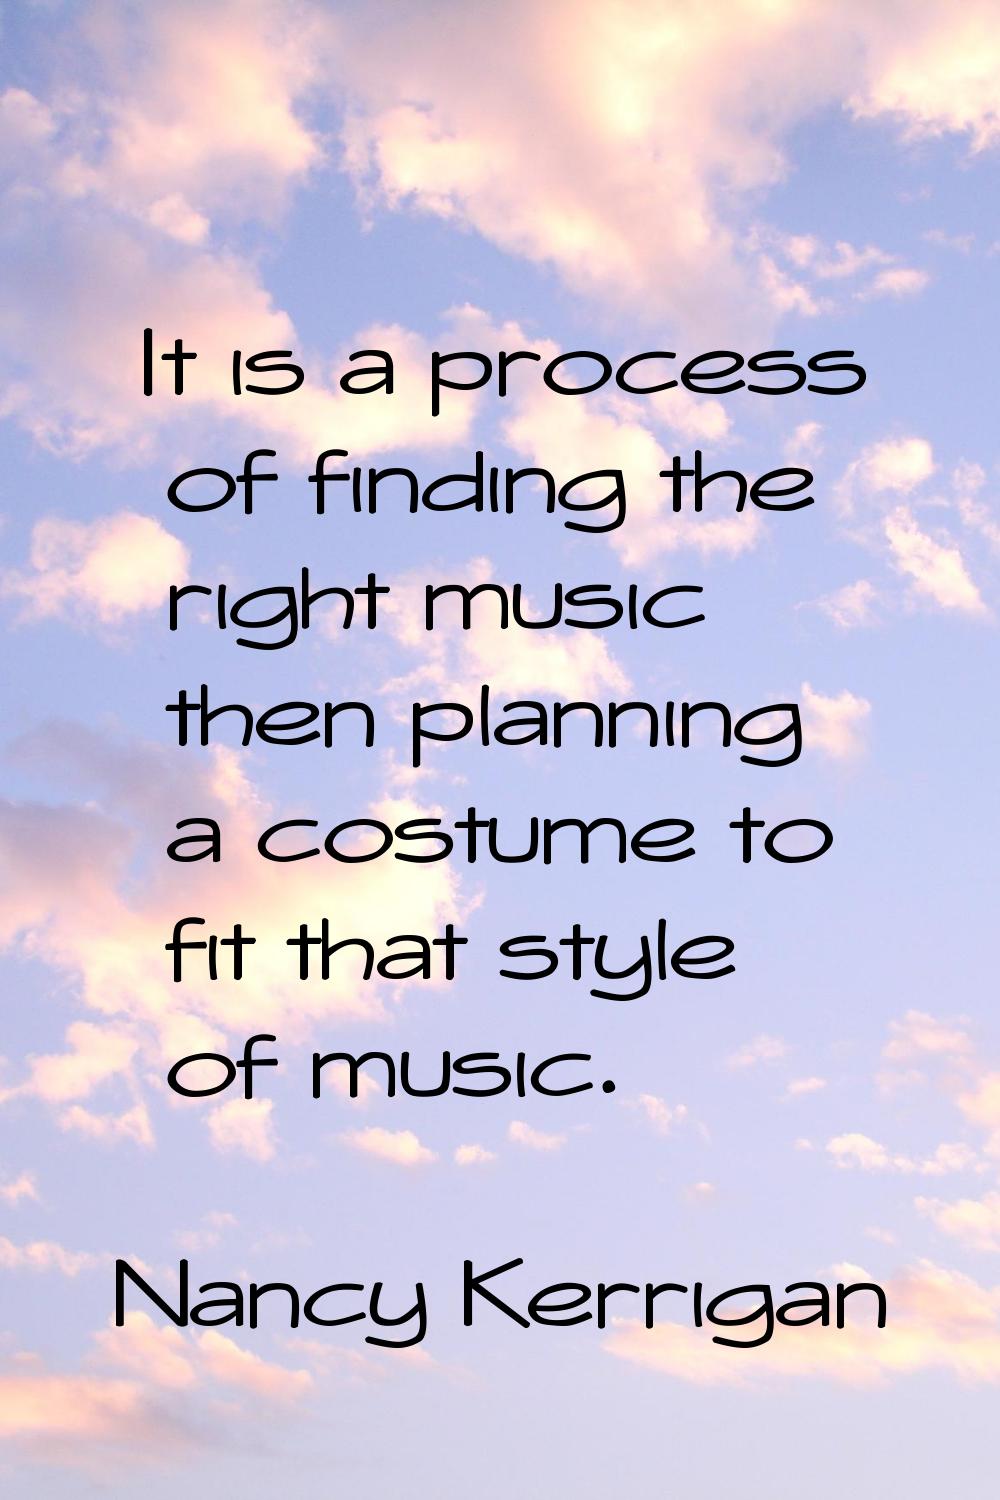 It is a process of finding the right music then planning a costume to fit that style of music.